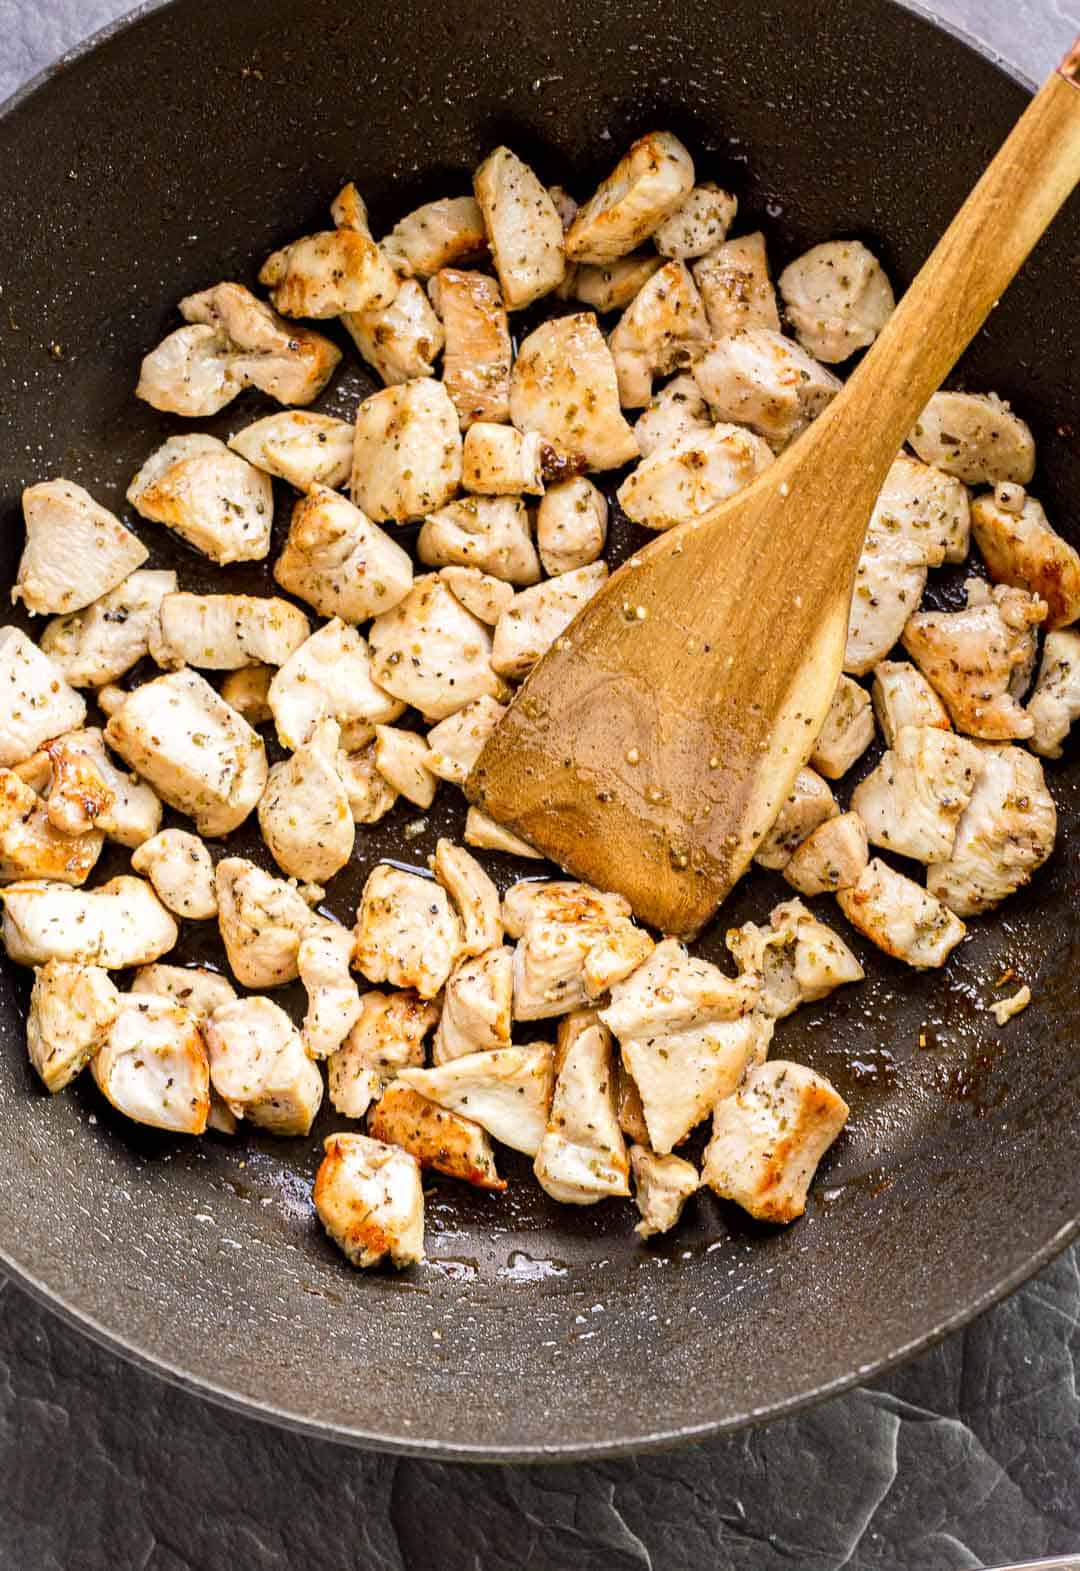 Searing chicken breast pieces in a pan